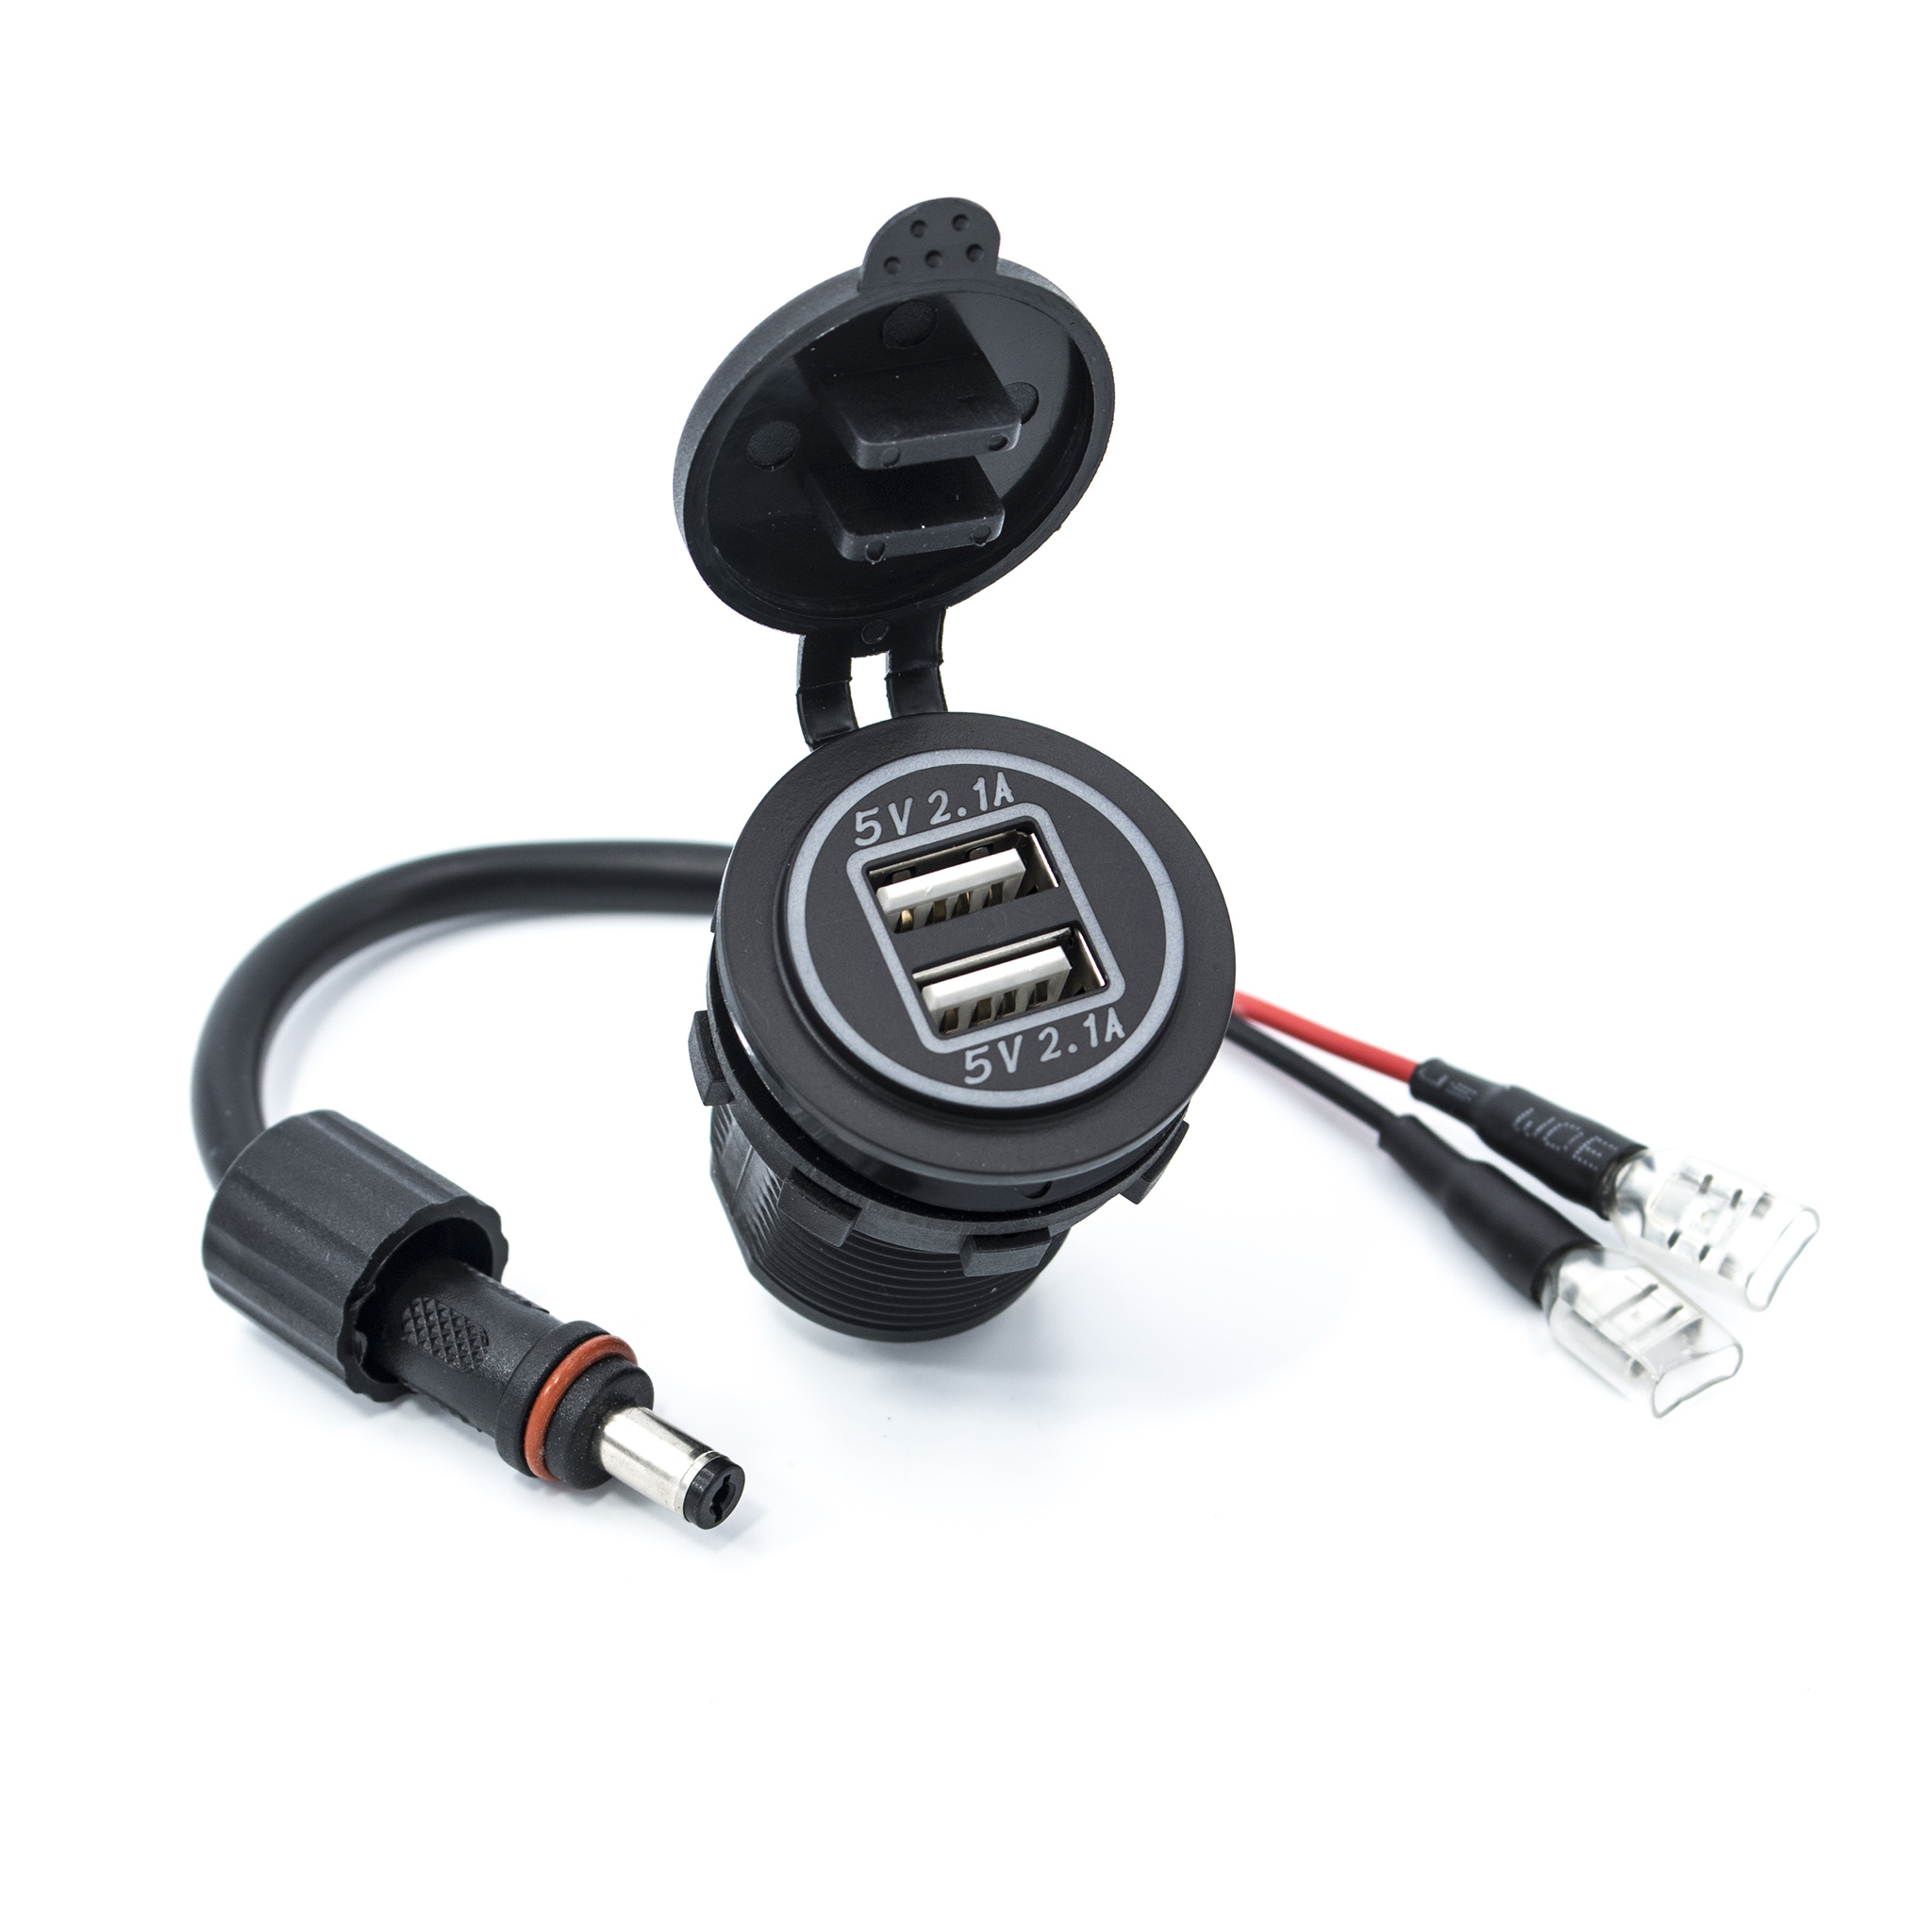 Dash Mount USB Dual Port With Weather Proof Cable - Mariner Sails